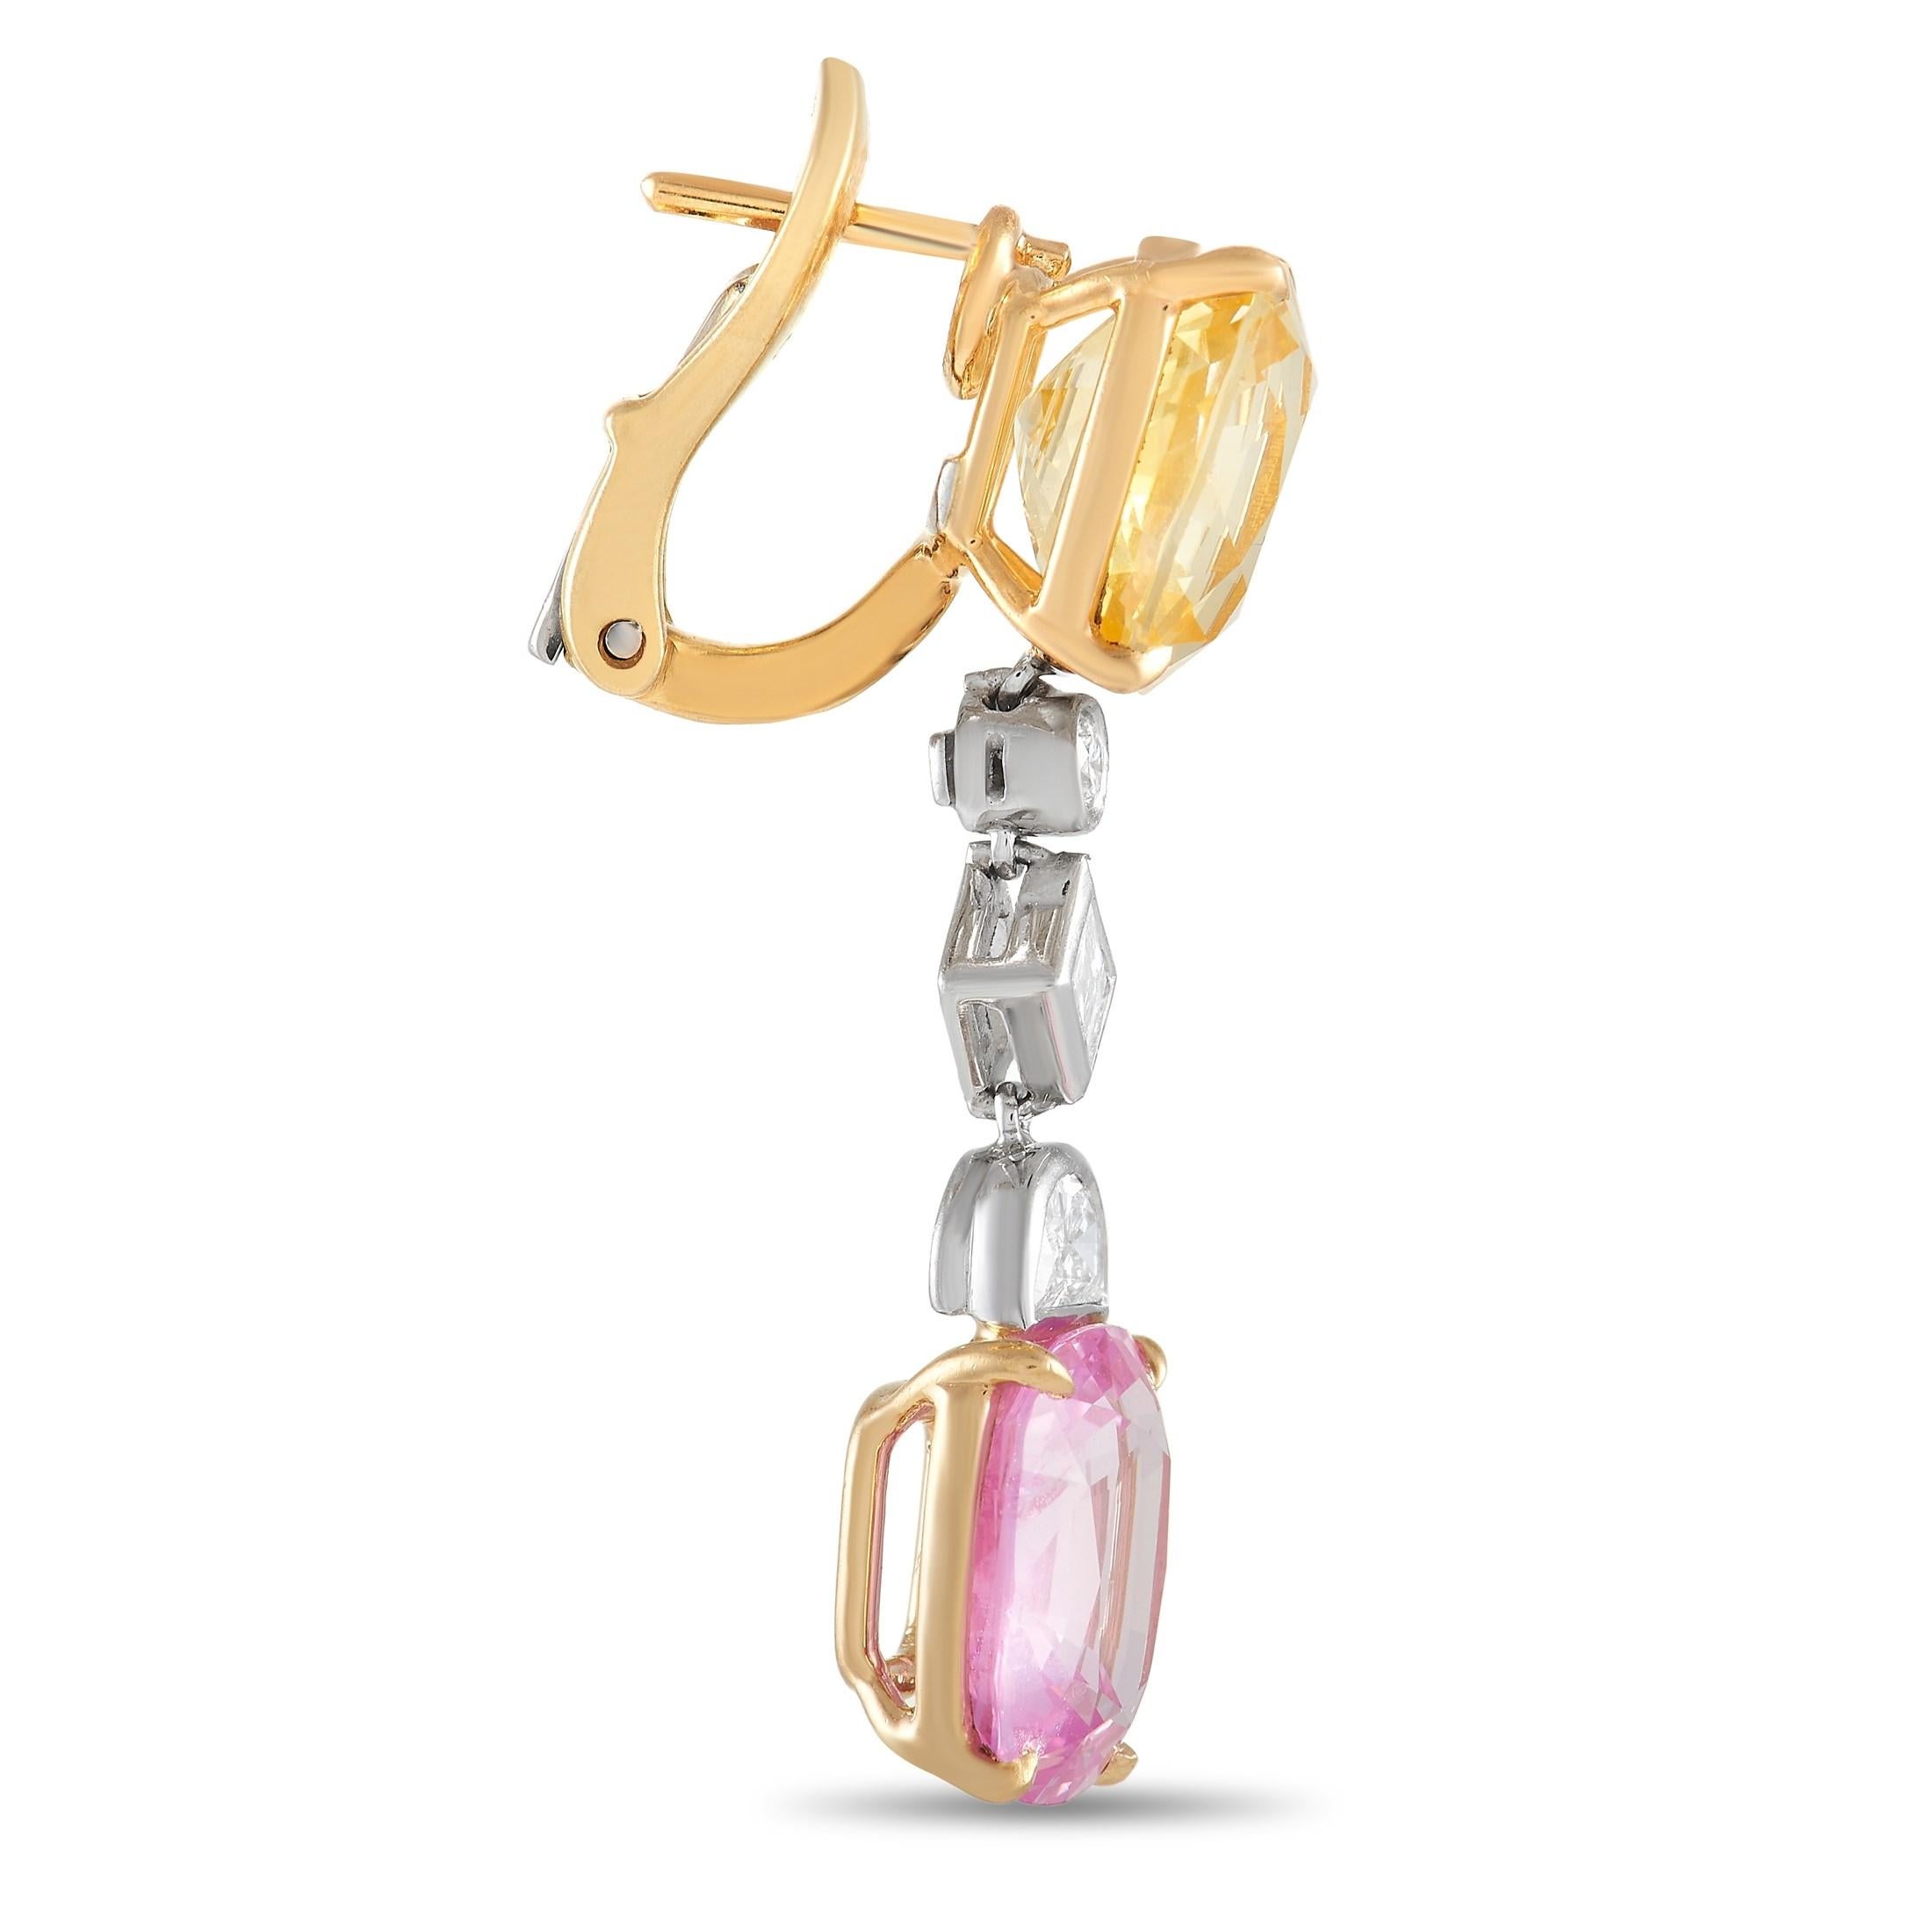 Colorful sapphires make these Bvlgari earrings a veritable work of art. Each exquisite setting measures 1.45” long, 0.45” wide, and is crafted from 18K Yellow Gold. The delicate design is accented by sparkling diamonds totaling 0.90 carats and is